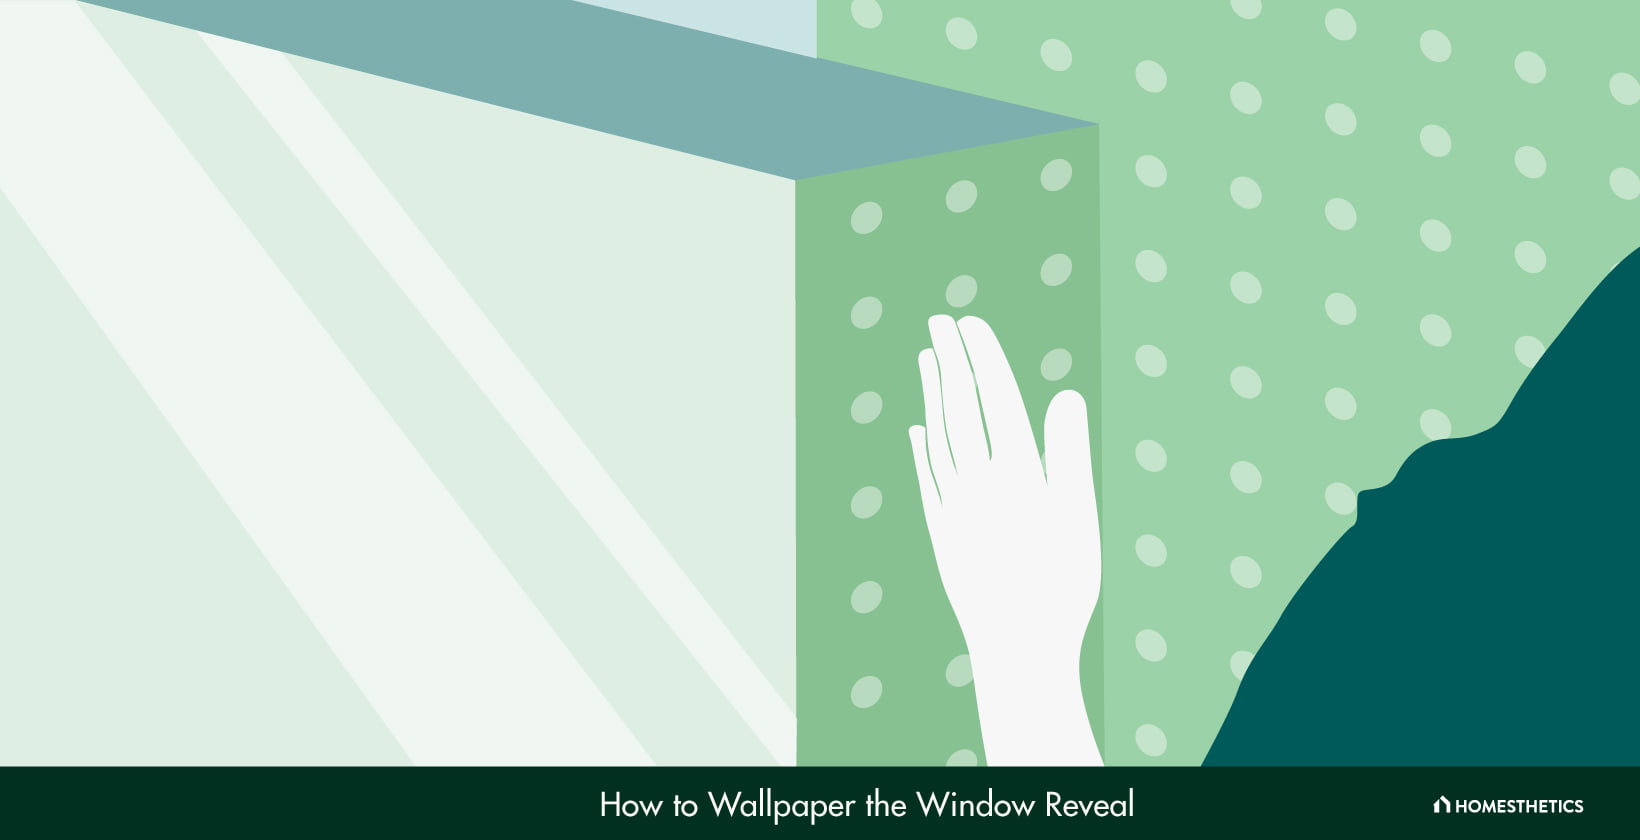 How to Wallpaper the Window Reveal